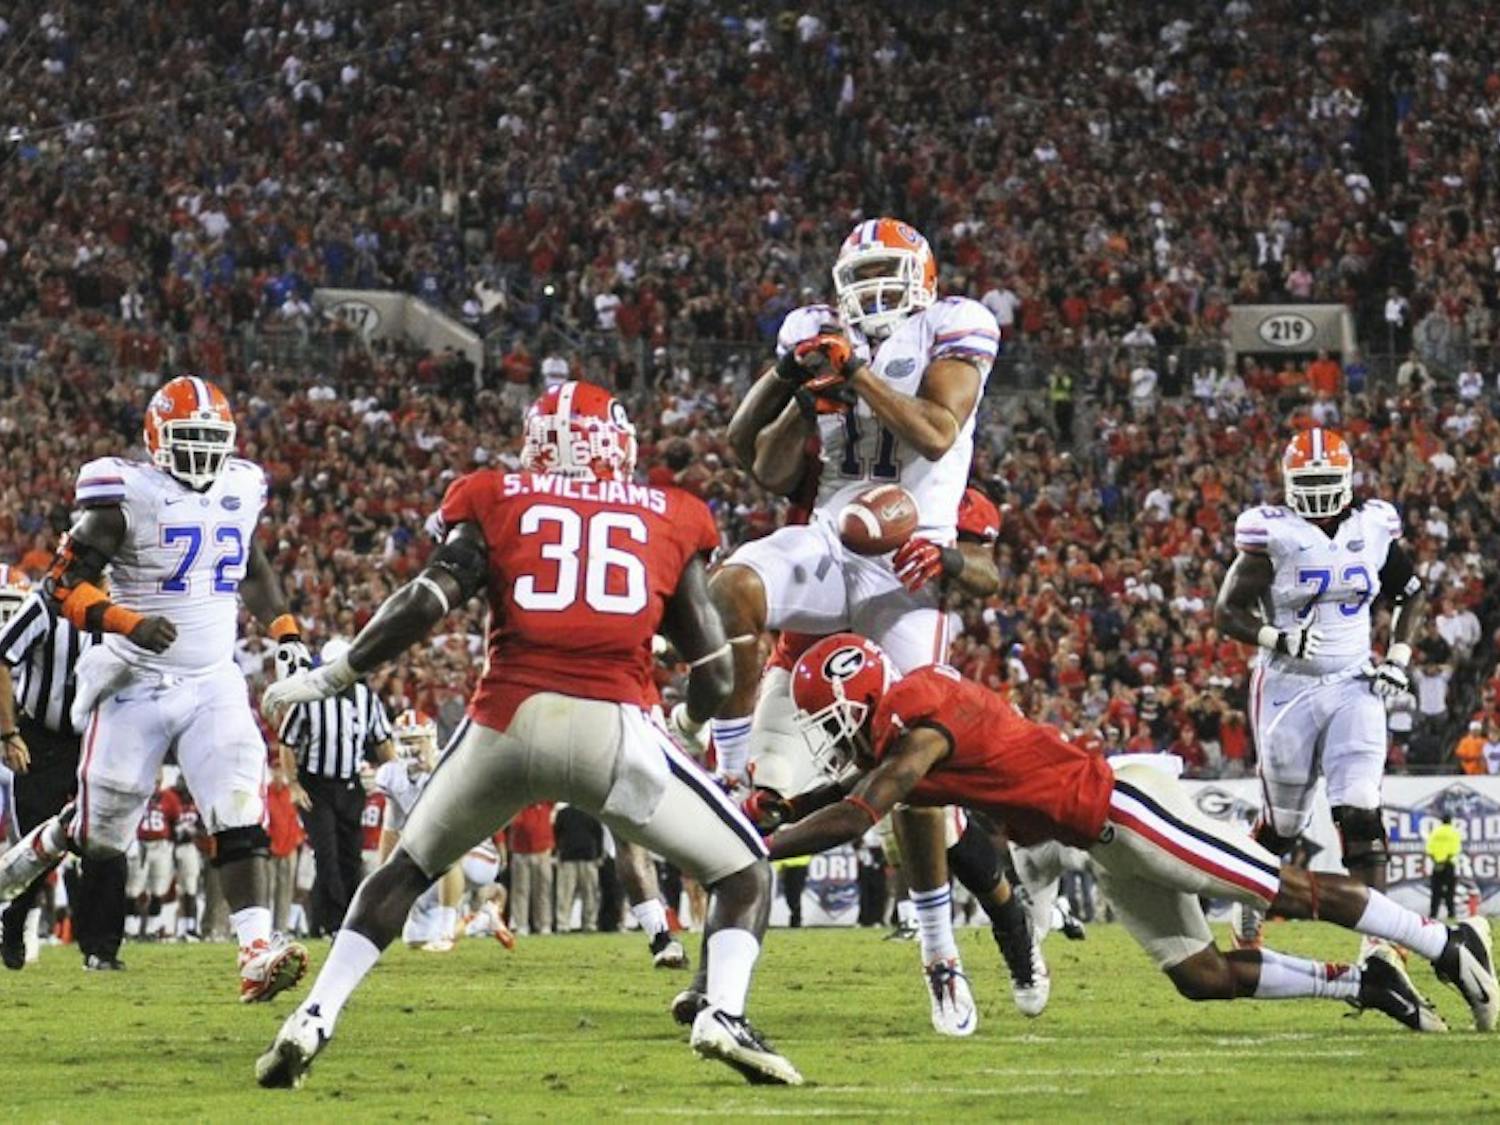 Tight end Jordan Reed (11) fumbles on Georgia’s 5-yard line late in the fourth quarter during Florida’s 17-9 loss to UGA on Saturday at EverBank Field in Jacksonville. The Gators’ six turnovers proved costly in the defeat.
